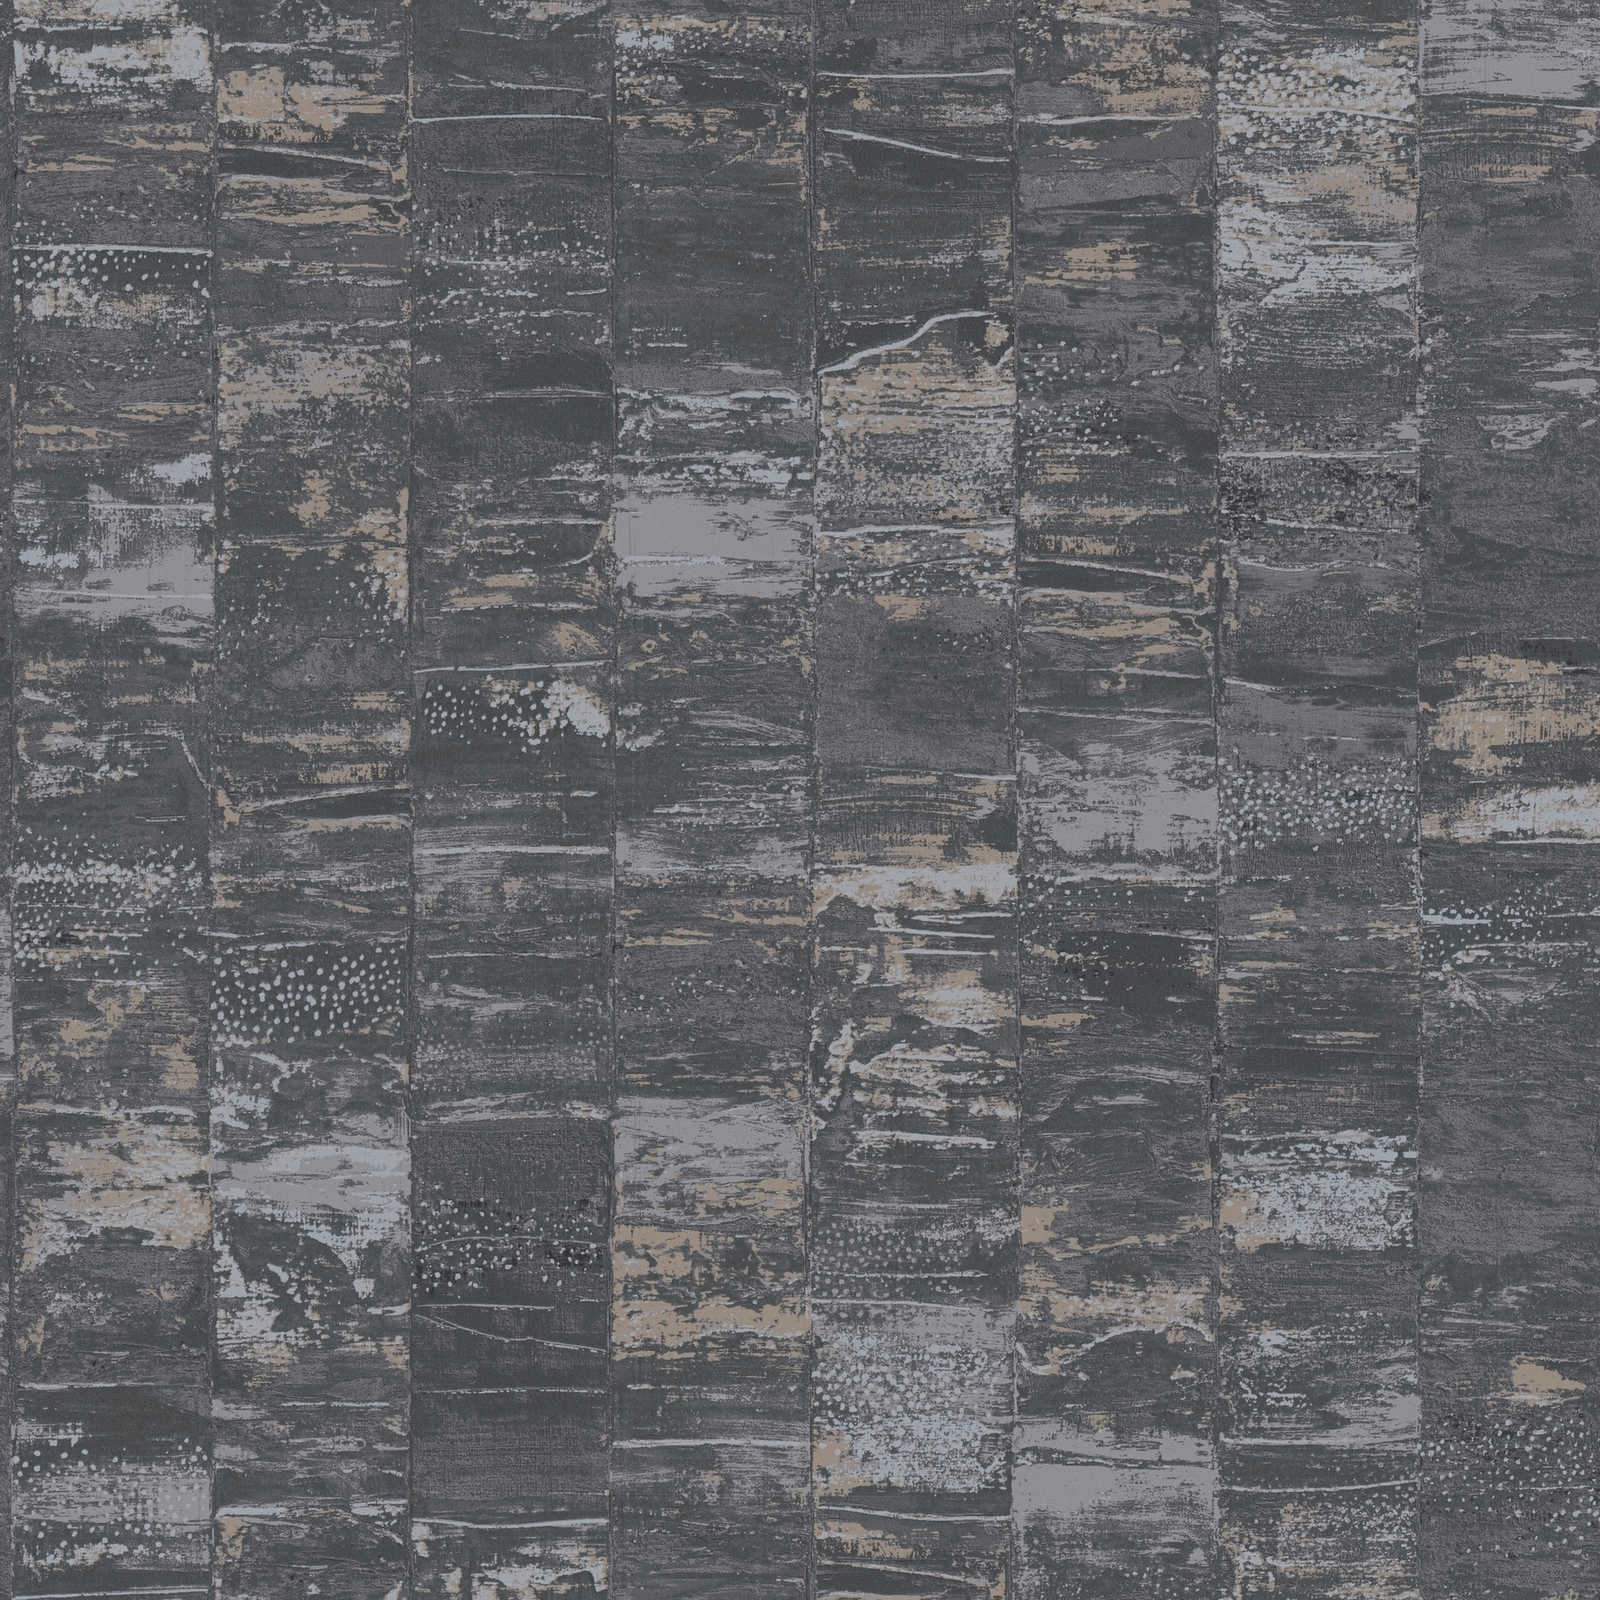         wallpaper anthracite-grey with structure design in used look - grey, black
    